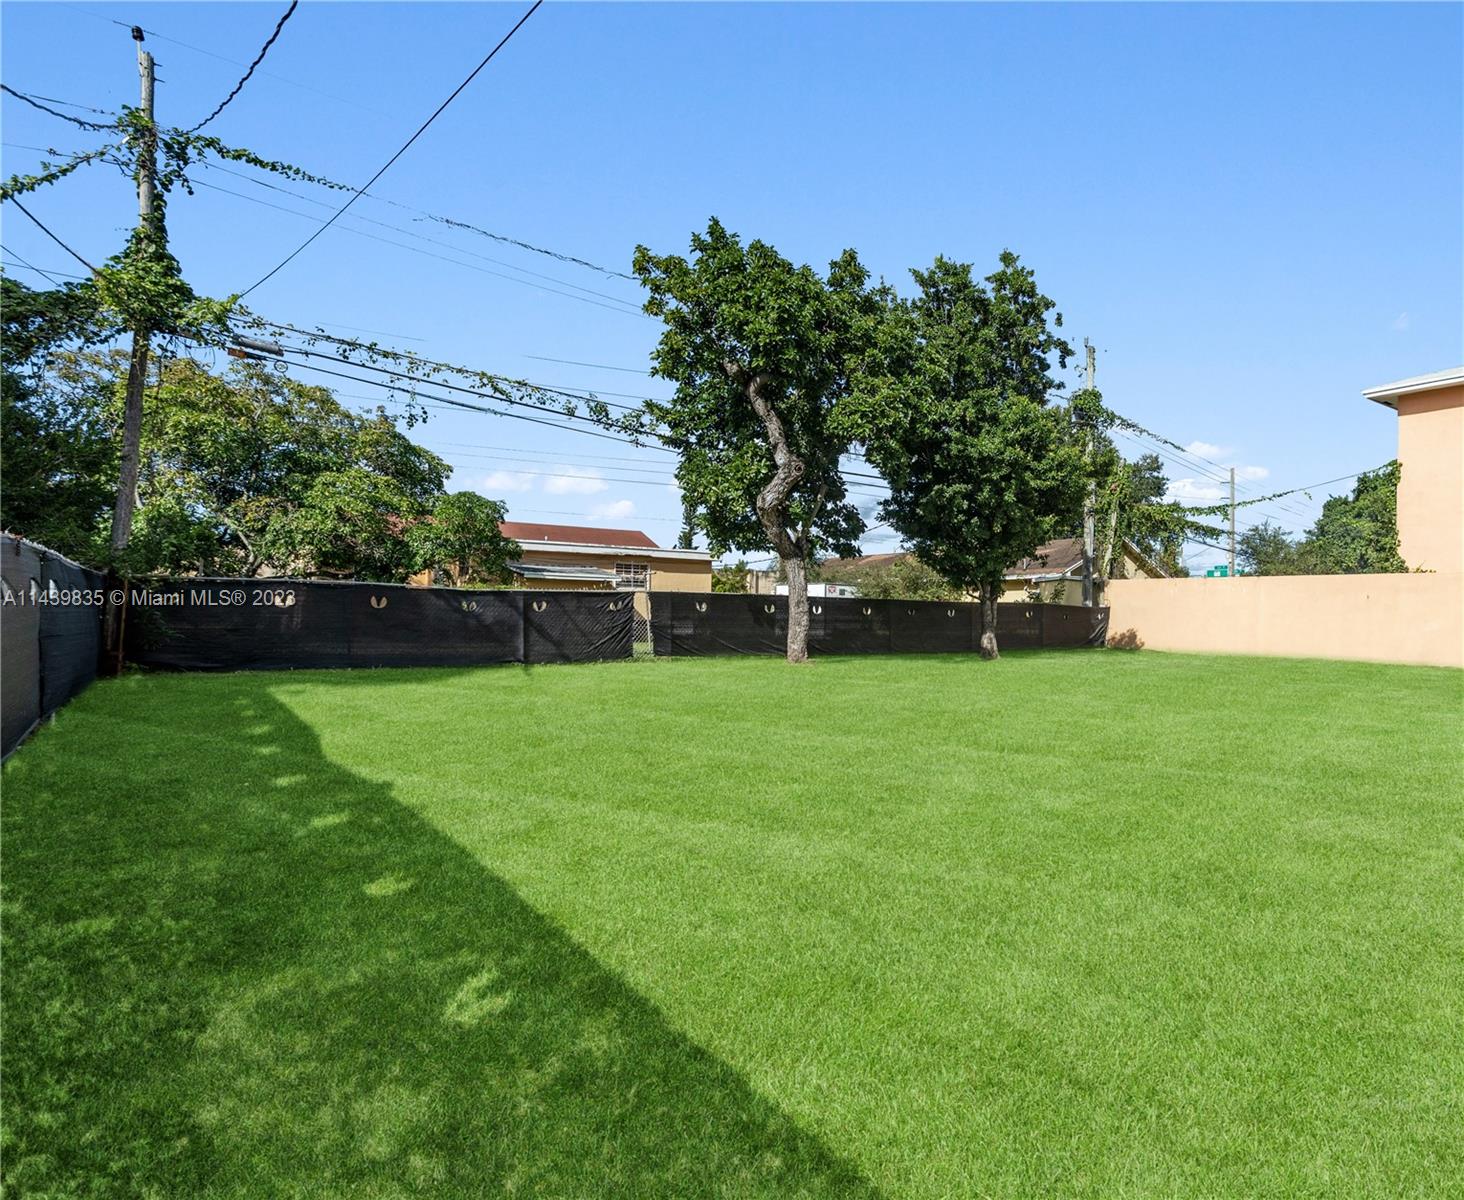 a view of yard with grass & house in the background